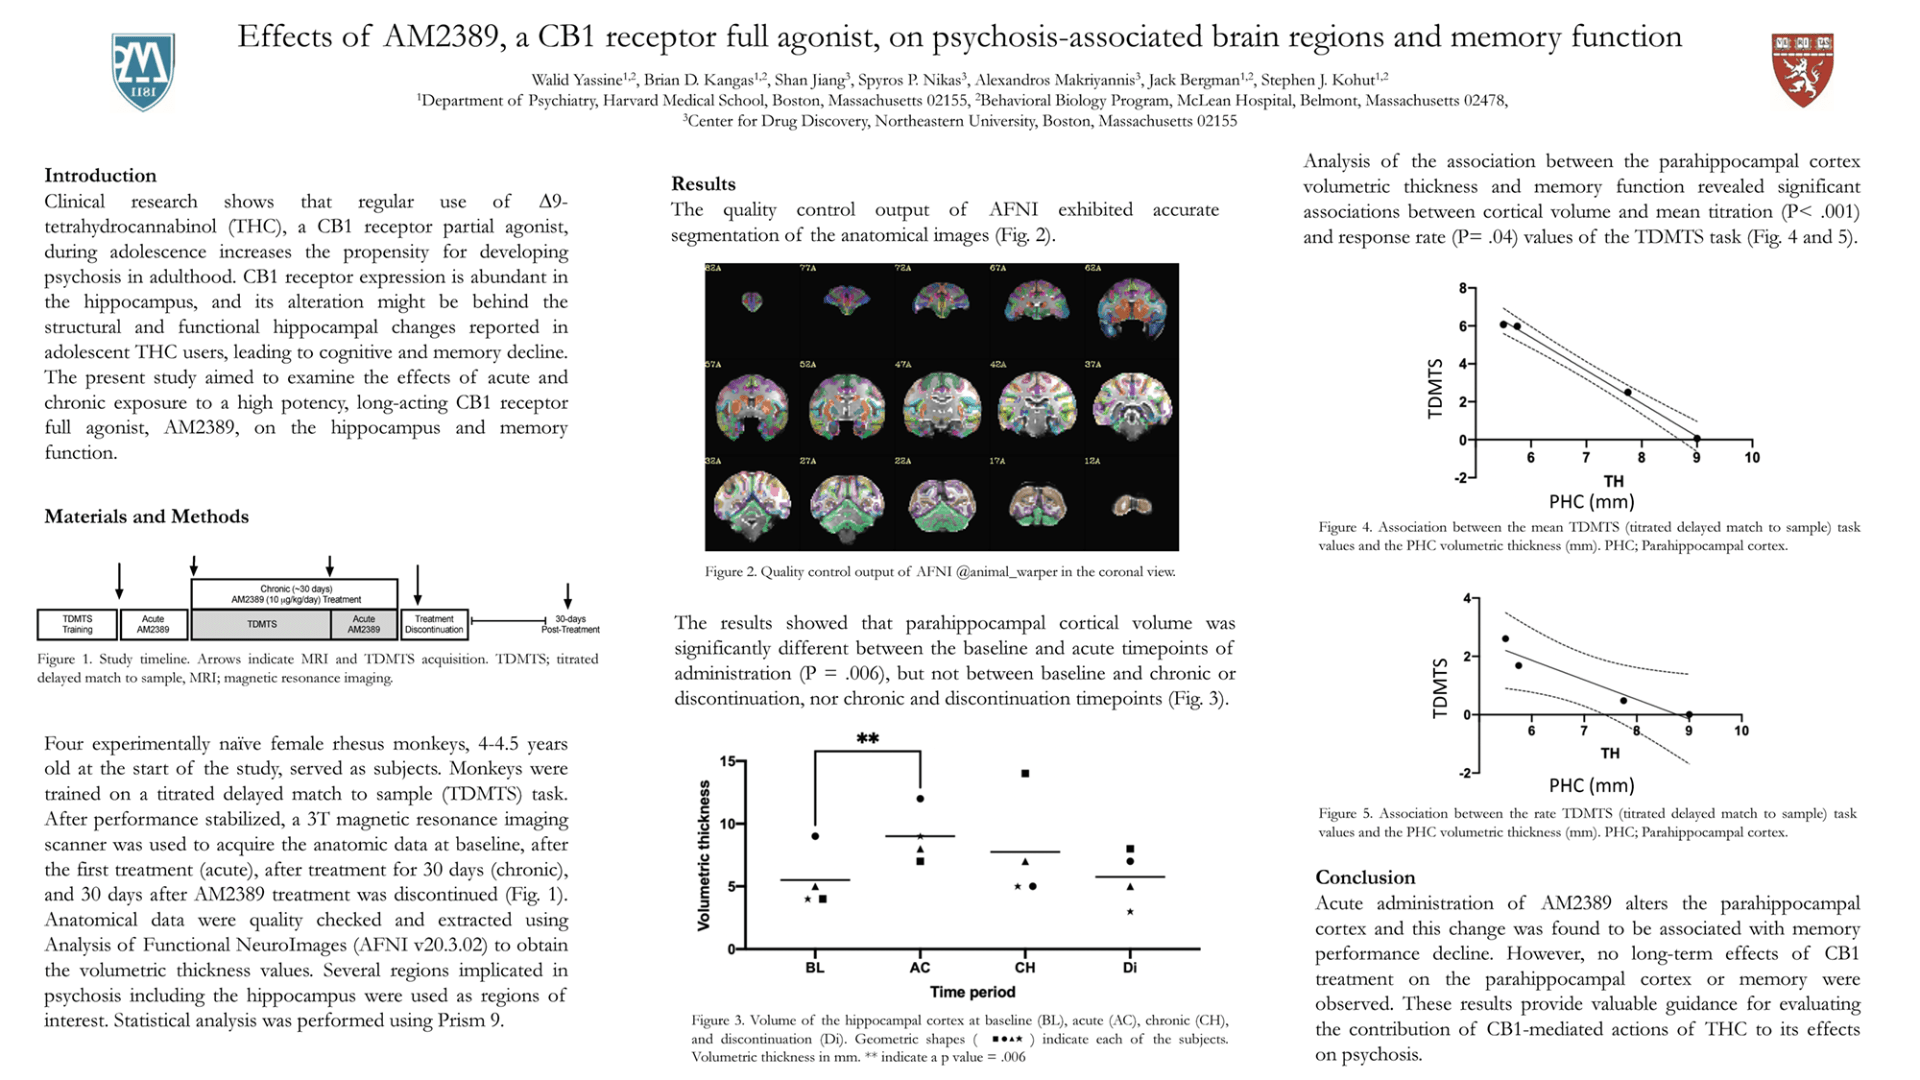 Effects of AM2389, a CB1 receptor full agonist, on psychosis-associated brain regions and memory function